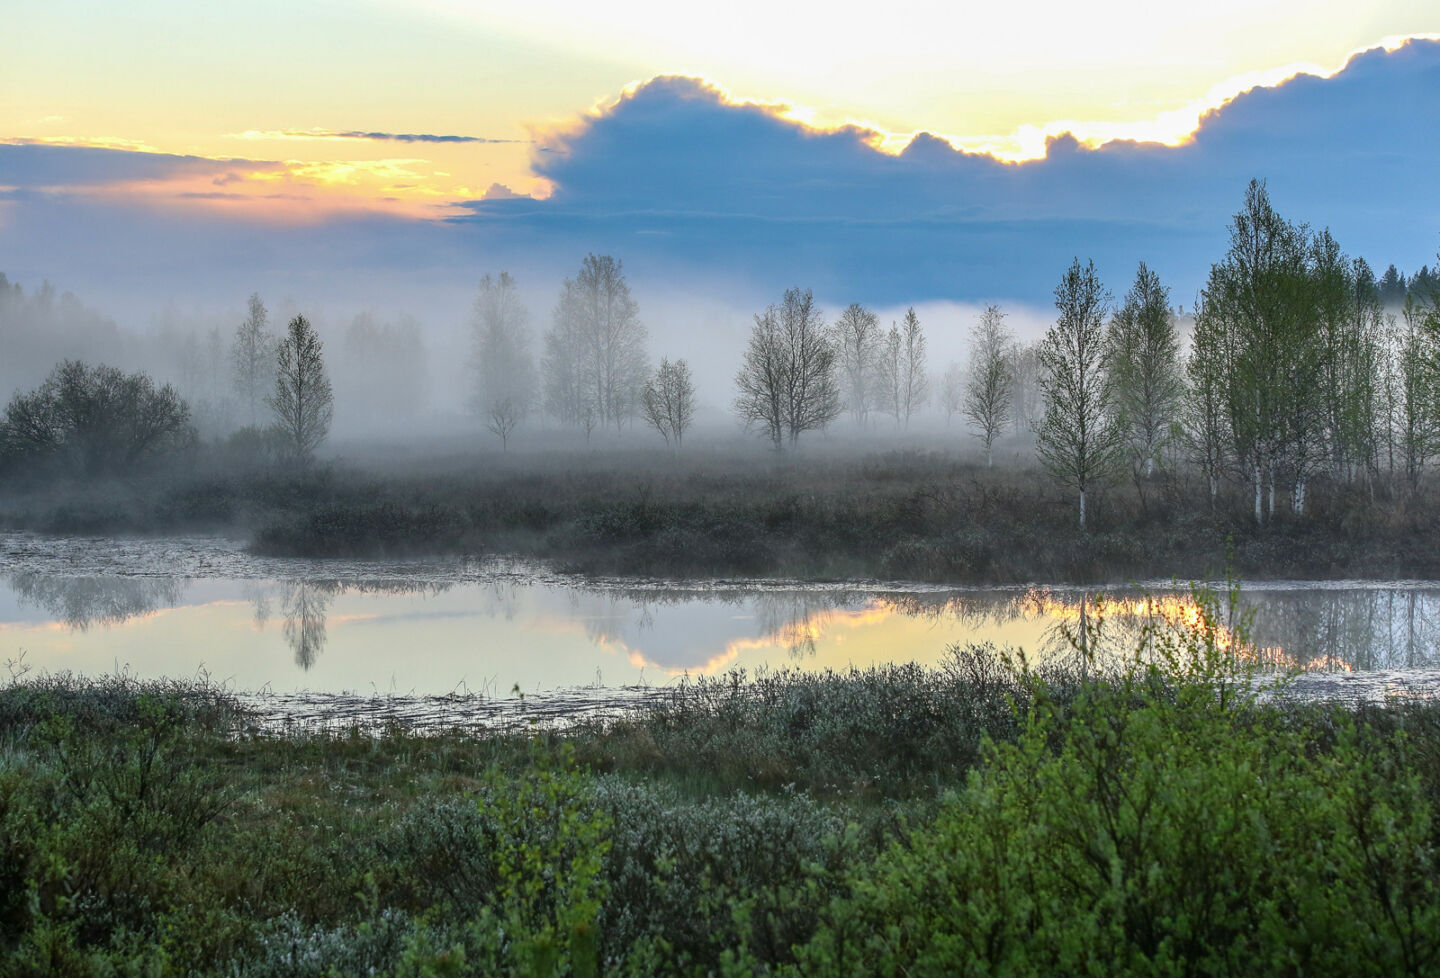 Foggy summer day over swampy Ranua, a Finnish Lapland filming location